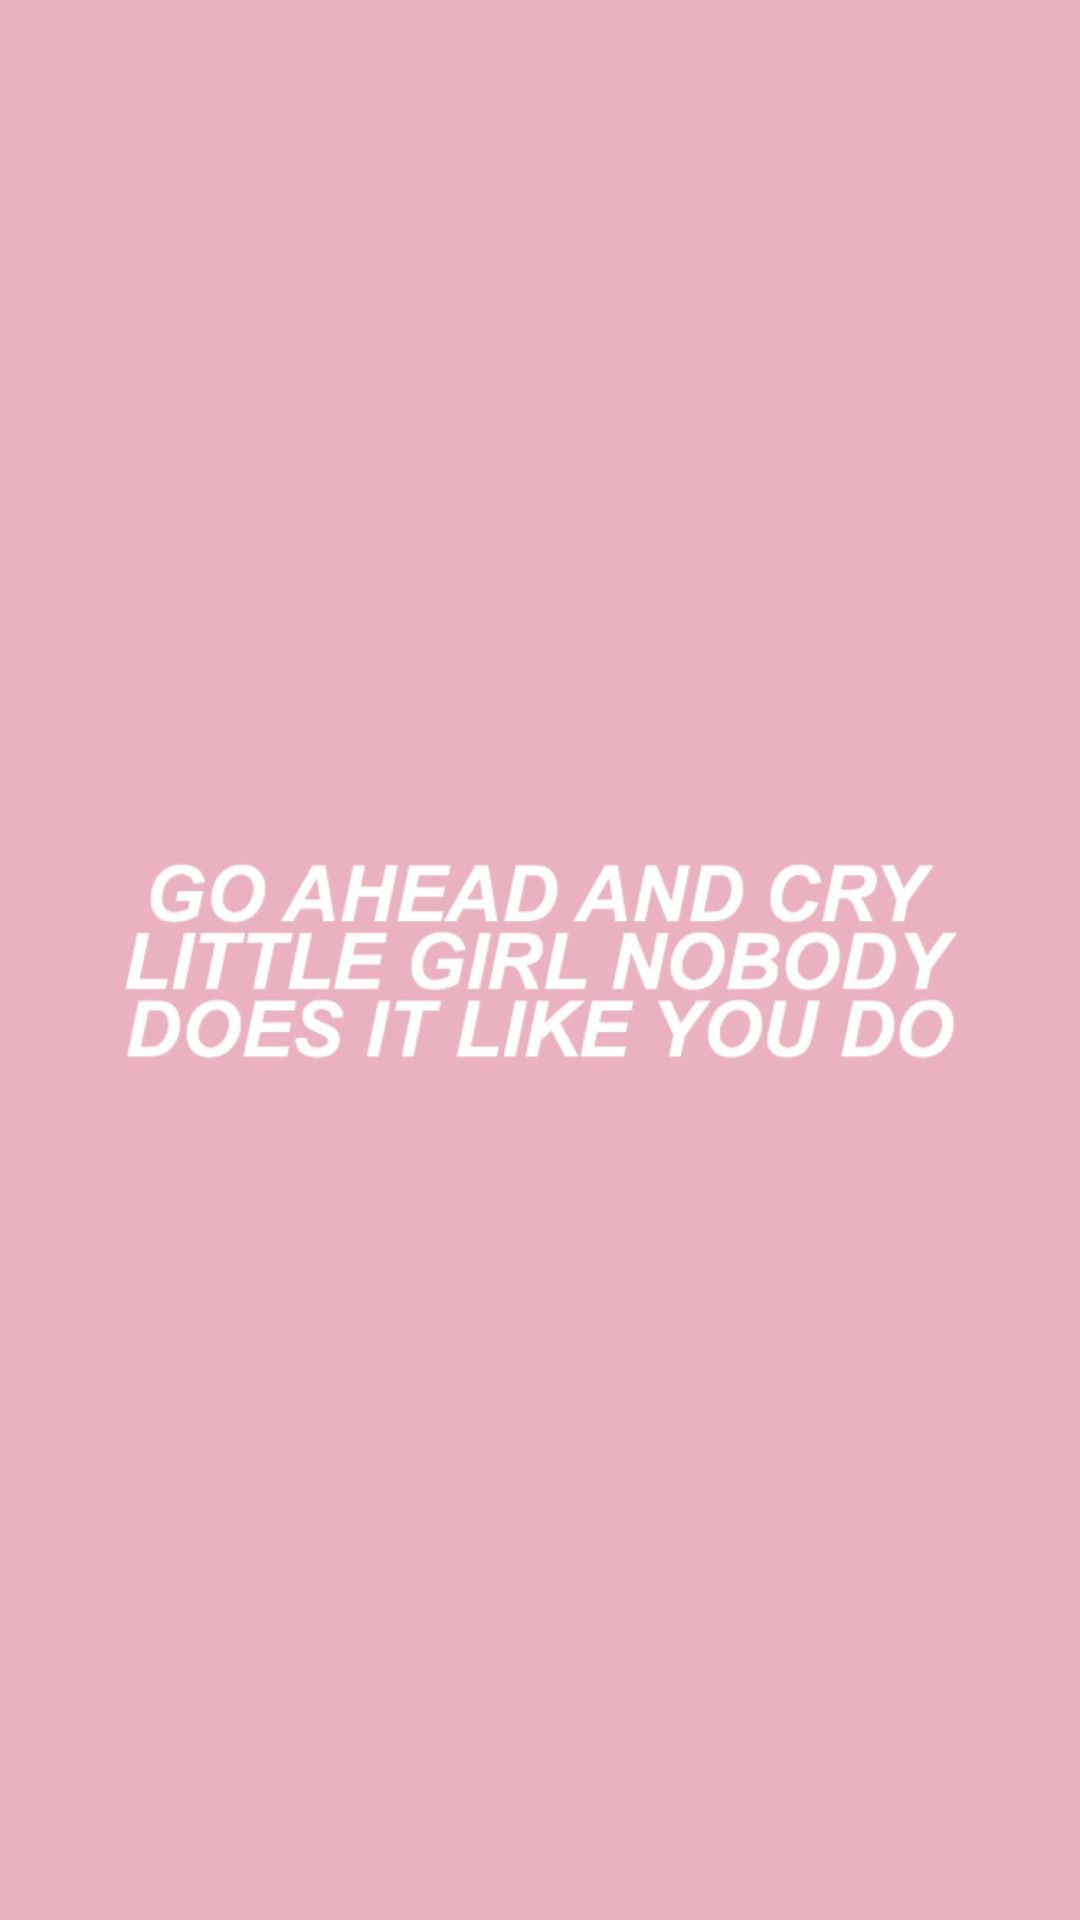 Aesthetic Pink Wallpaper With Words